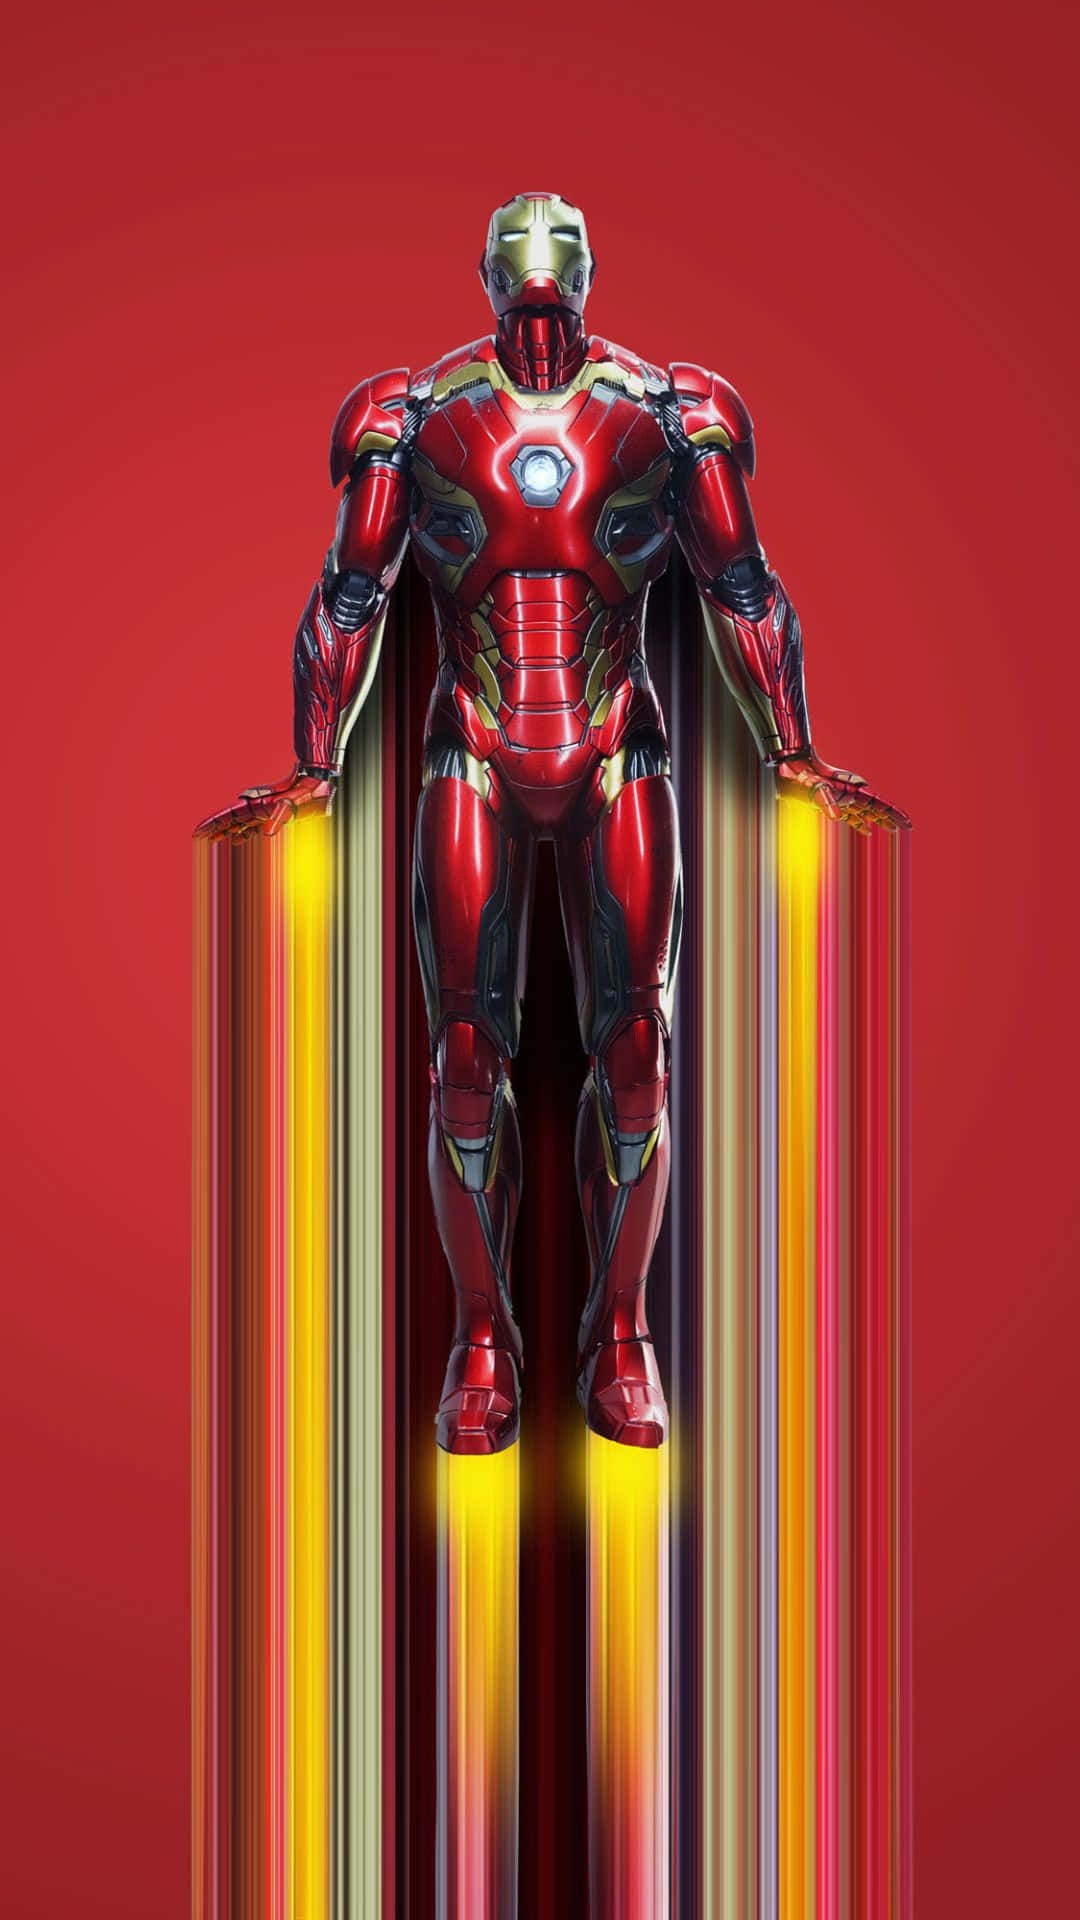 Android Iron Man is Ready for Action